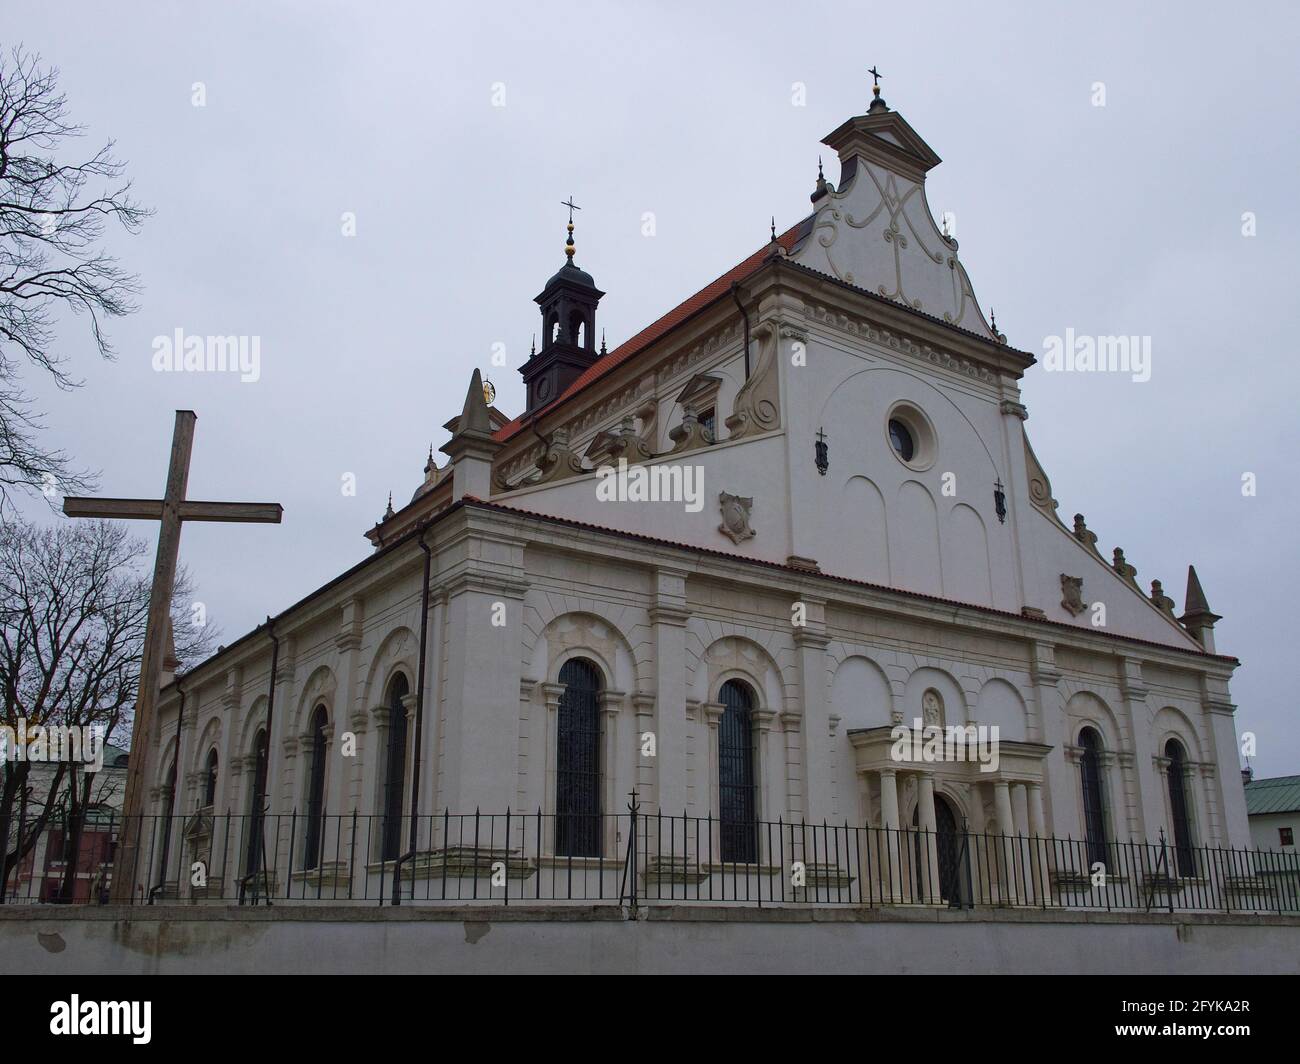 Cathedral of the Resurrection and St. Thomas the Apostle, Zamosc. Ancient European architecture, landmark. Stock Photo